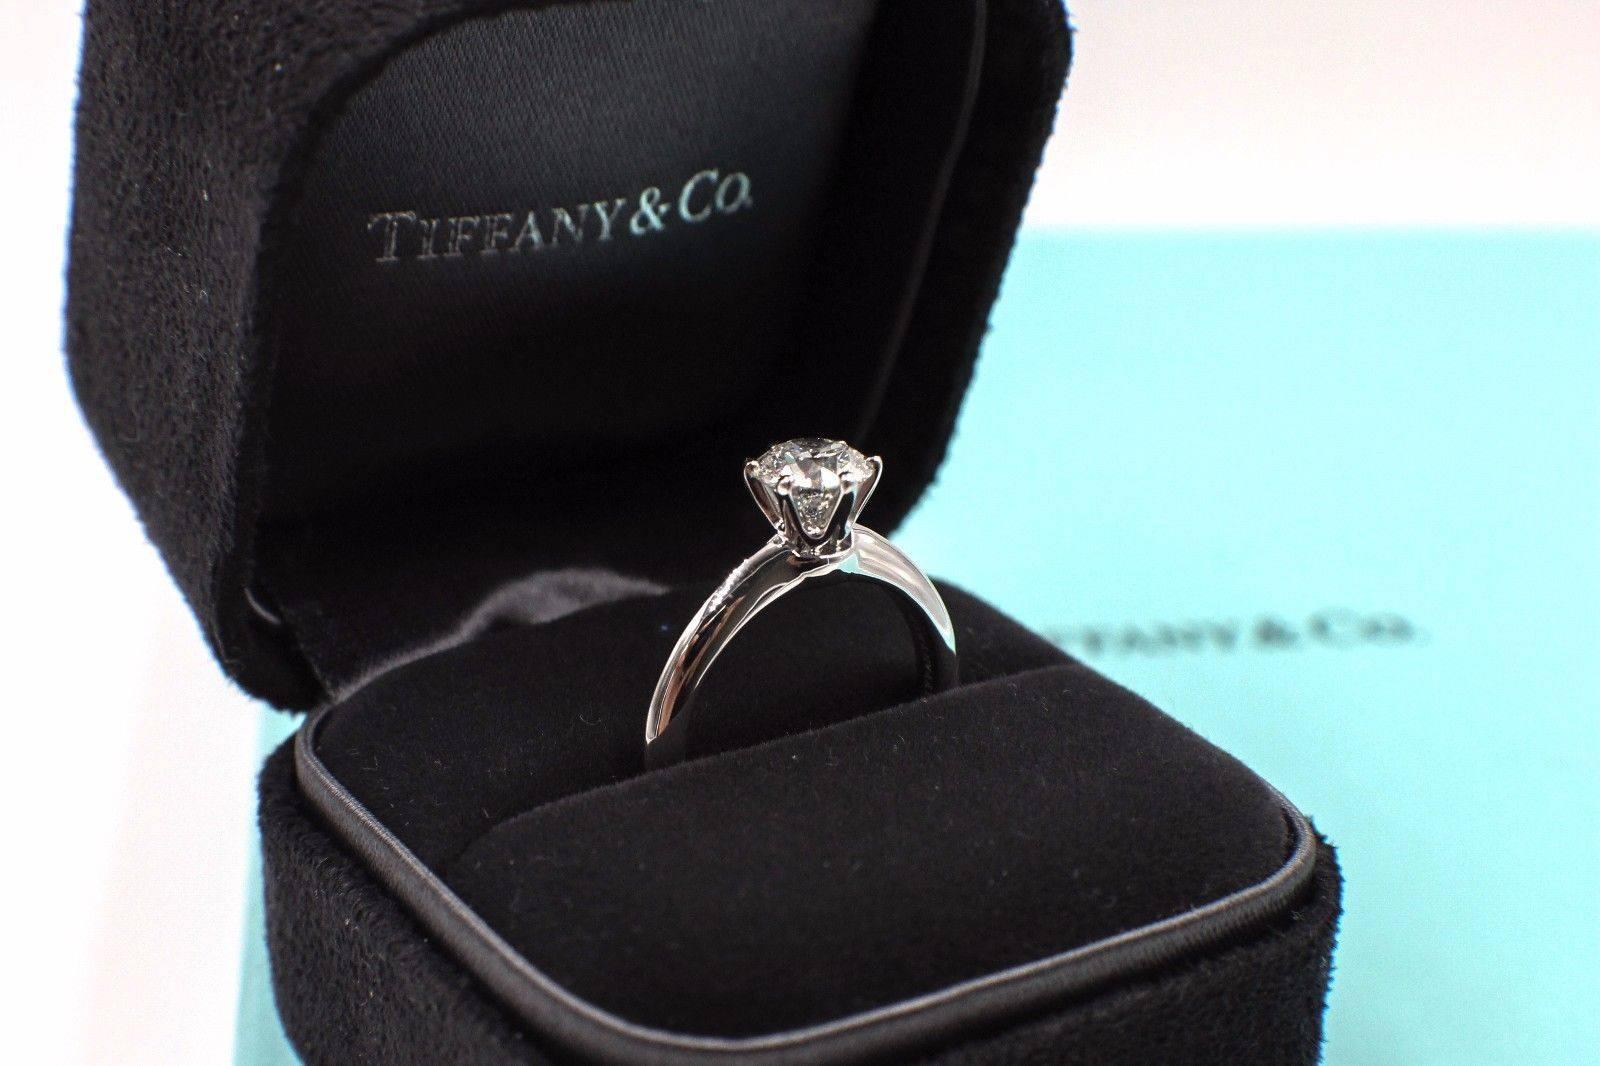 Tiffany & Co. Diamond Engagement Ring Round Solitaire 1.02 Carat H VS1 4